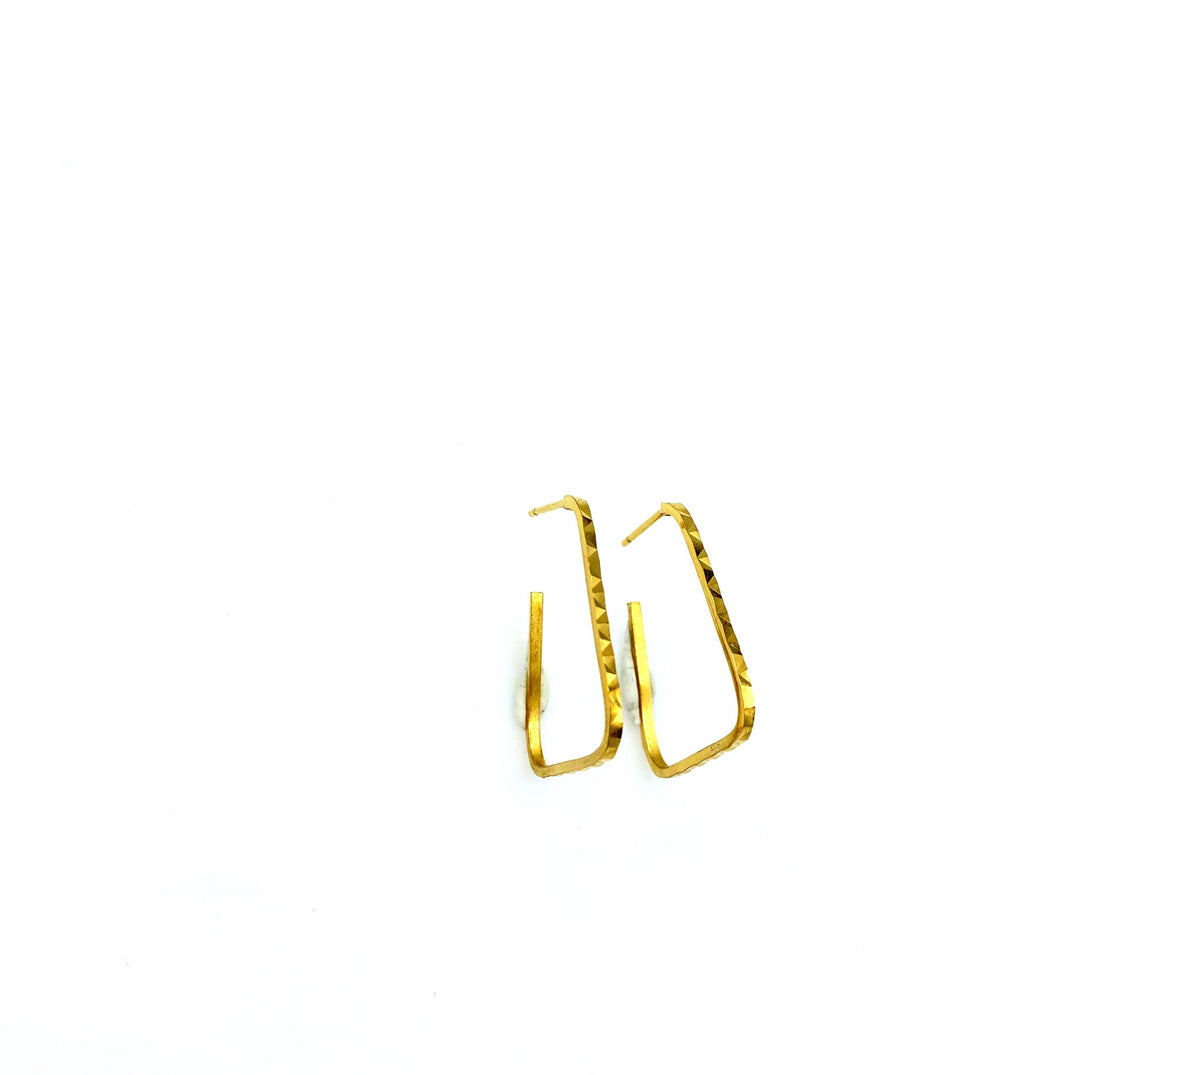 Gold Filled Thin Triangle Vintage Hoop Pierced Earrings - 24 Wishes Vintage Jewelry